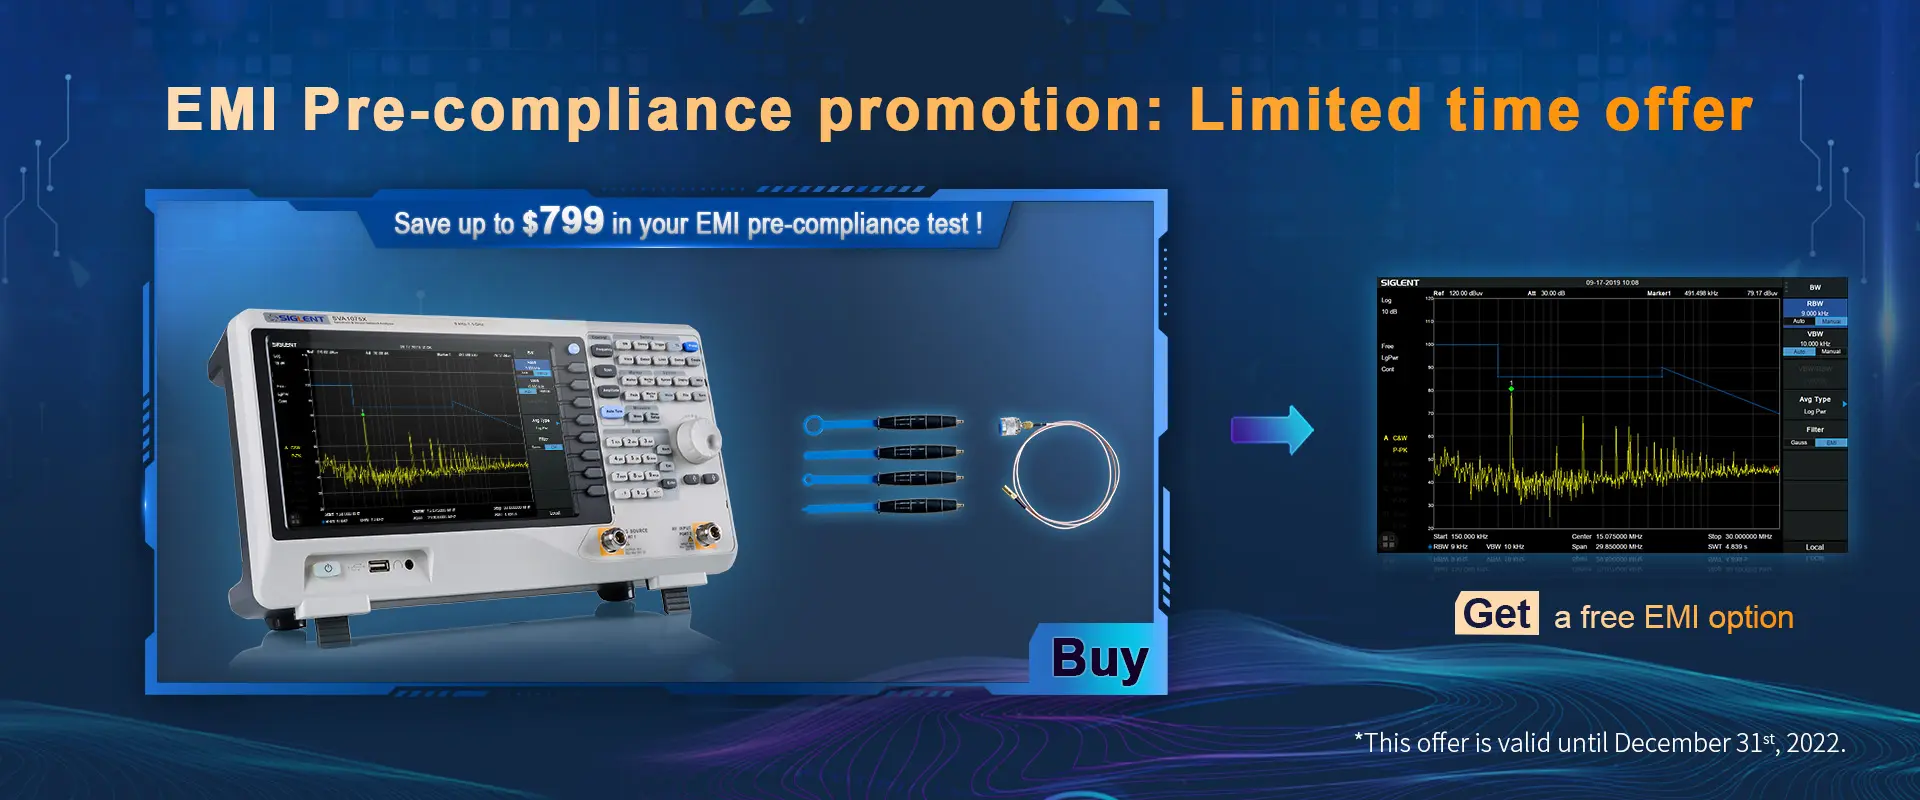 Limited time offer for EMI pre-compliance test